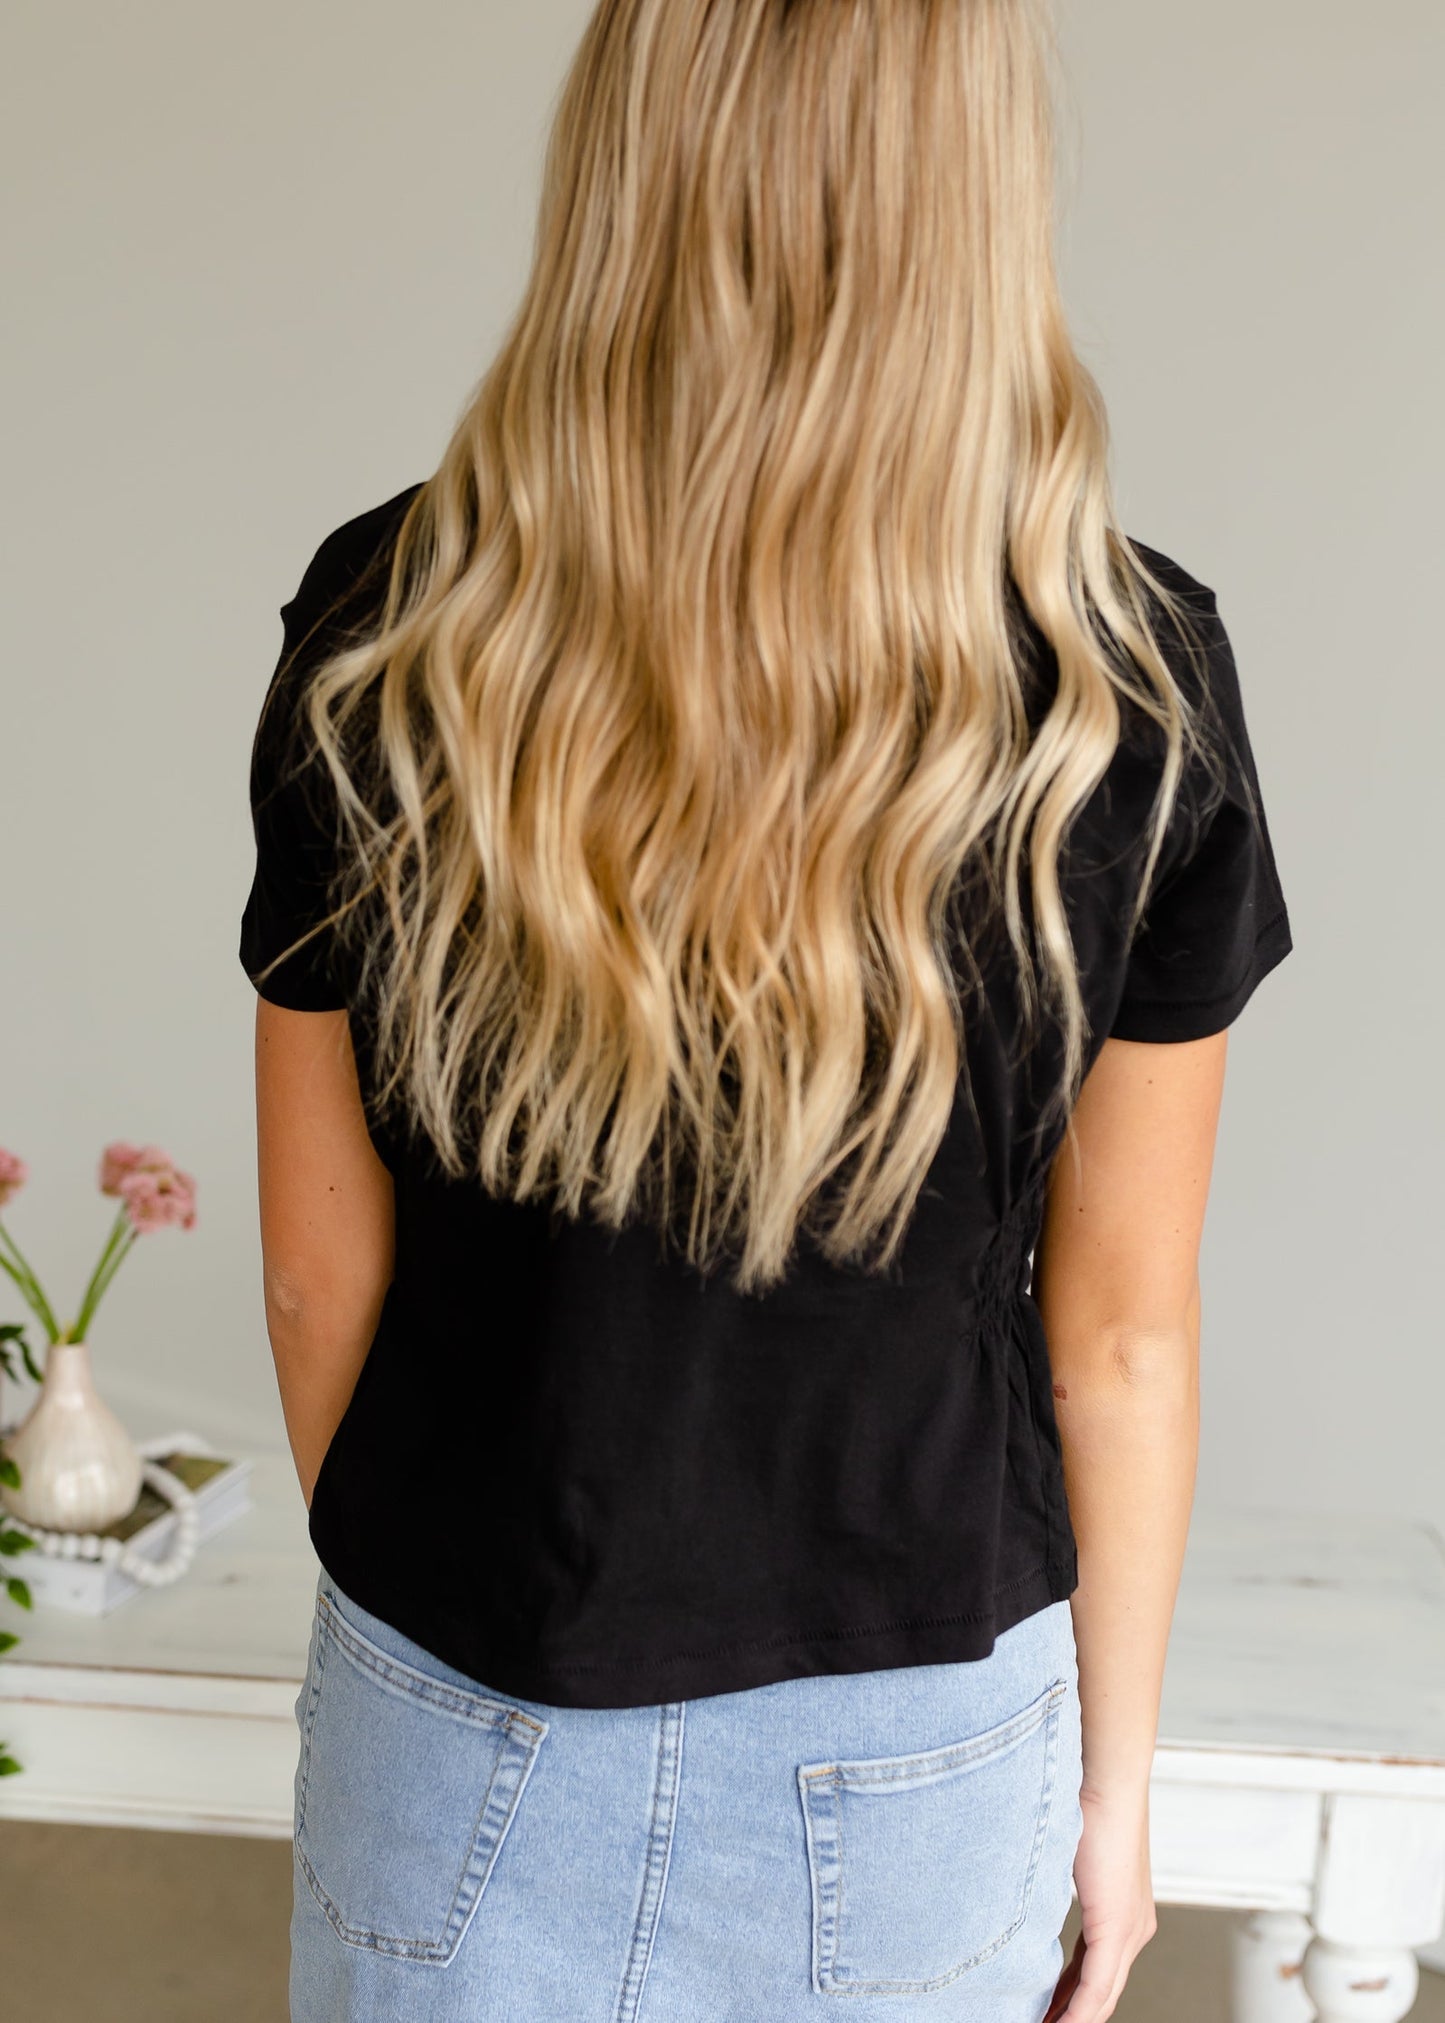 Black Knit Cinched Top - FINAL SALE Tops